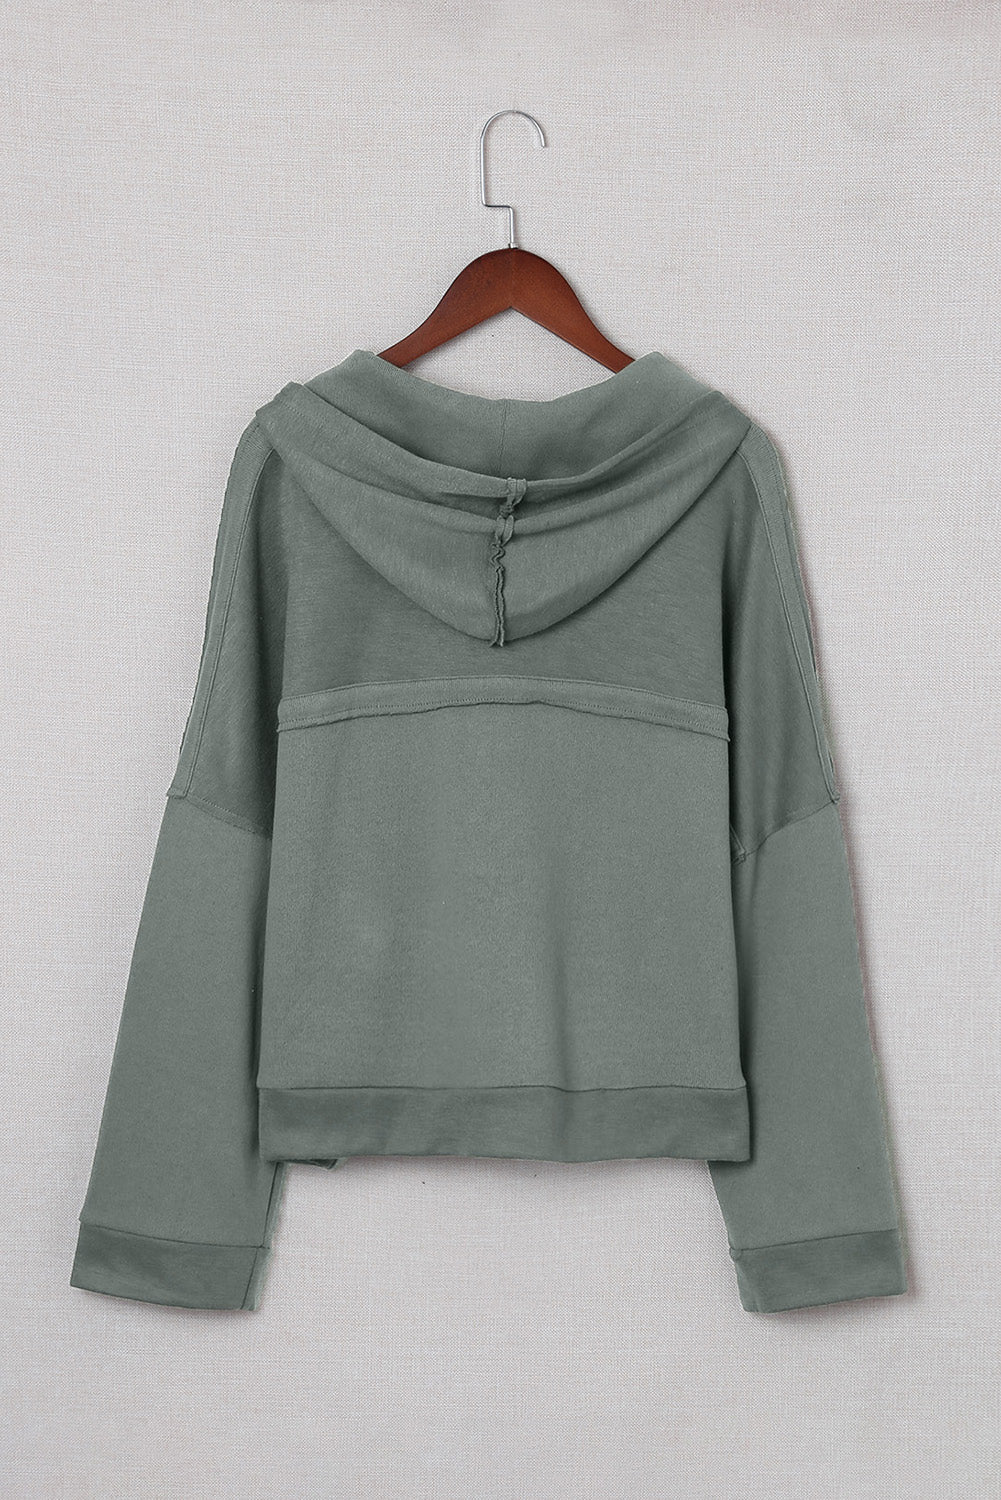 Khaki Casual Button Solid Patchwork Trim Hoodie